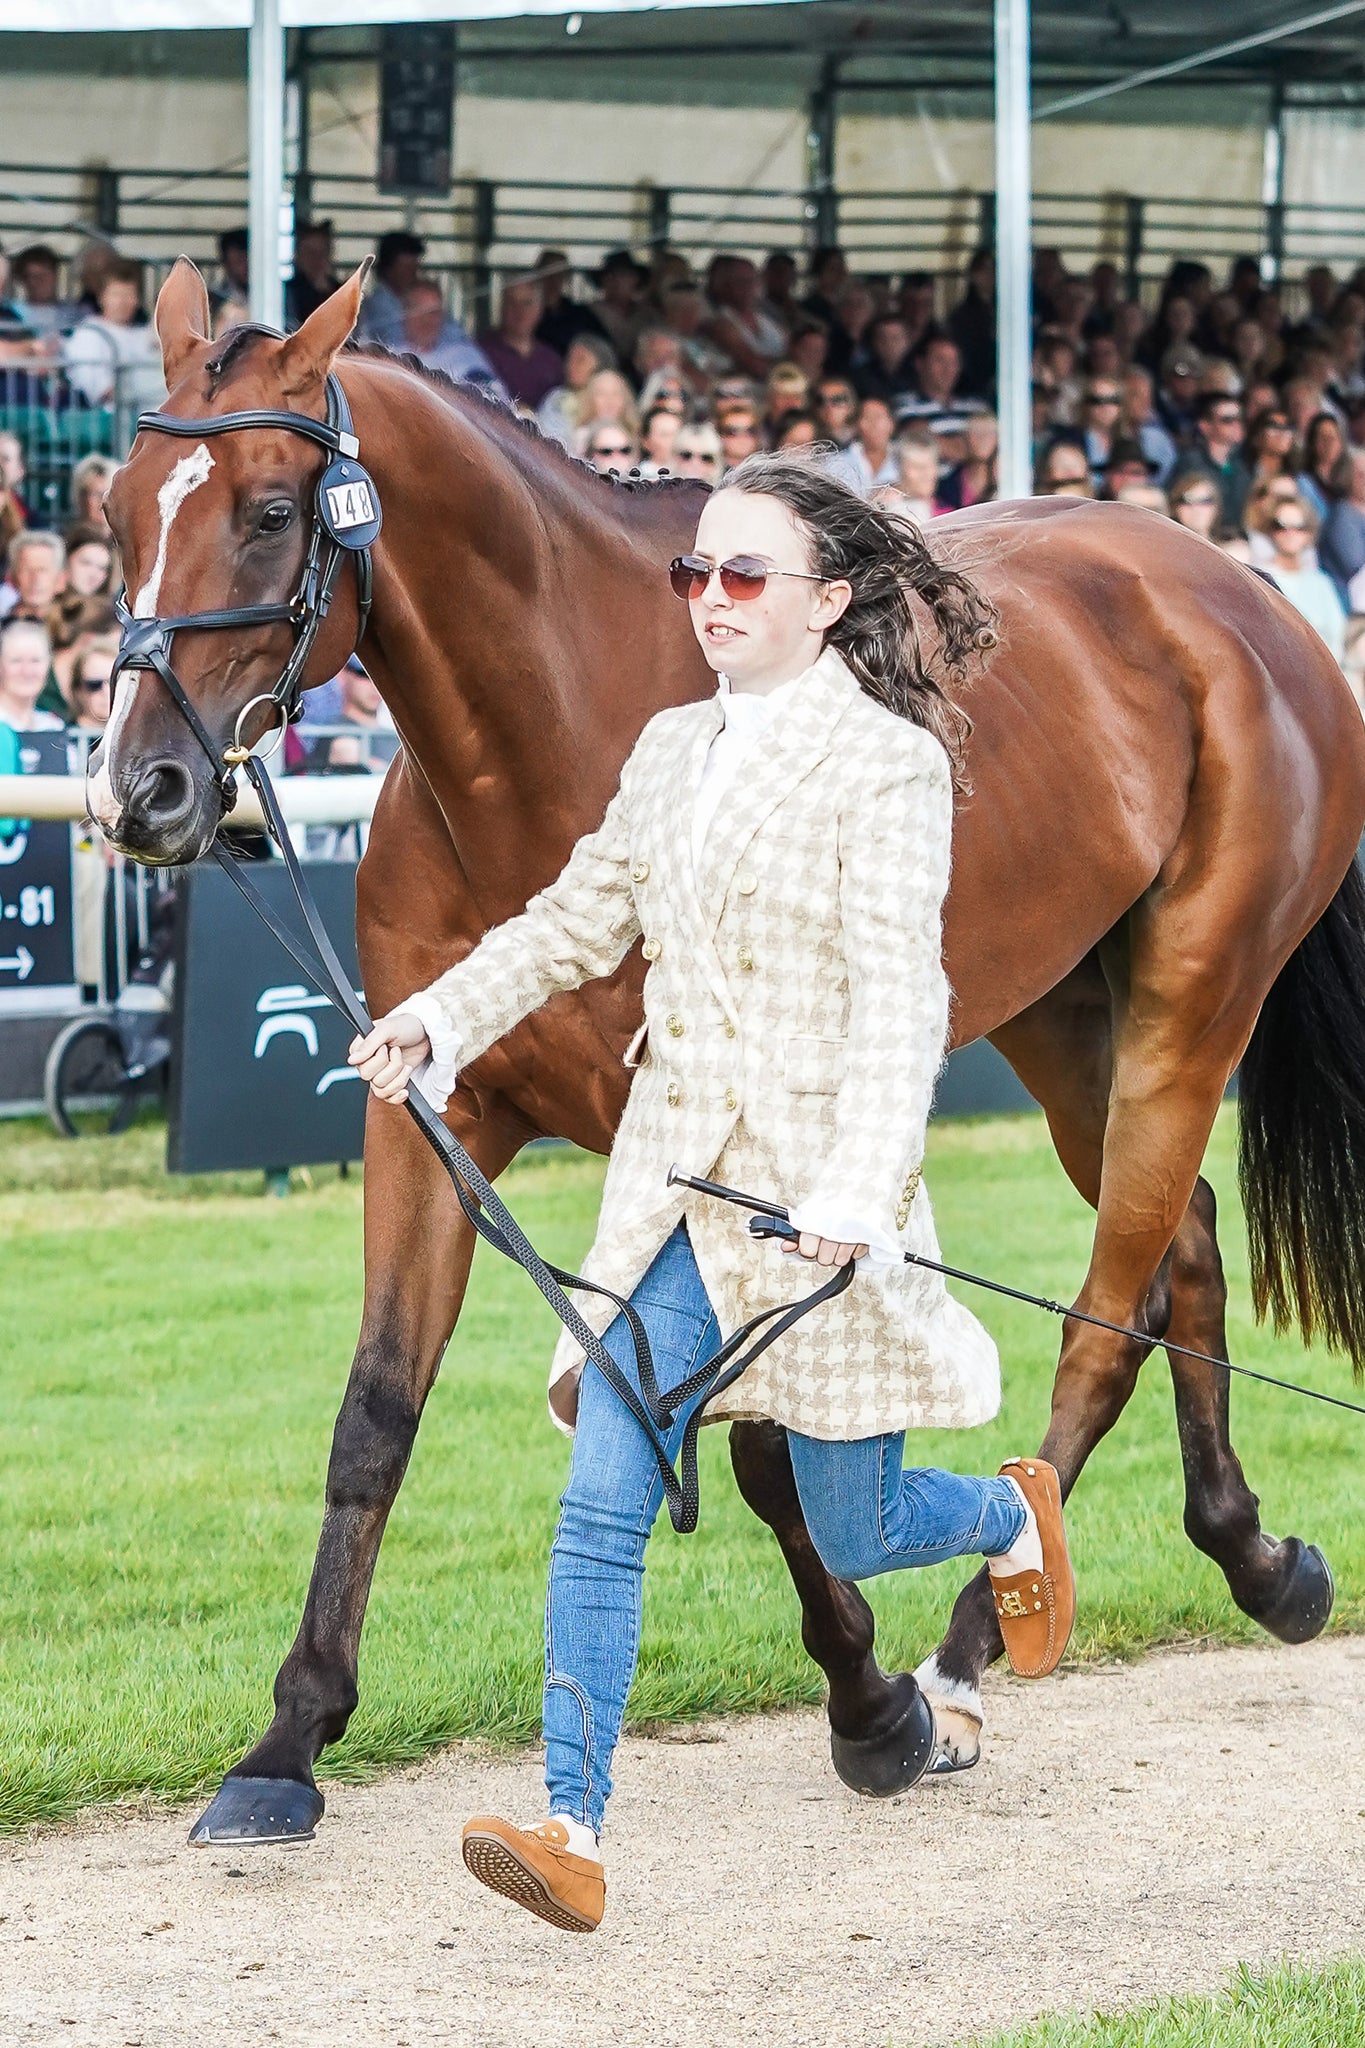 Emma Thomas' Trot Up Look One